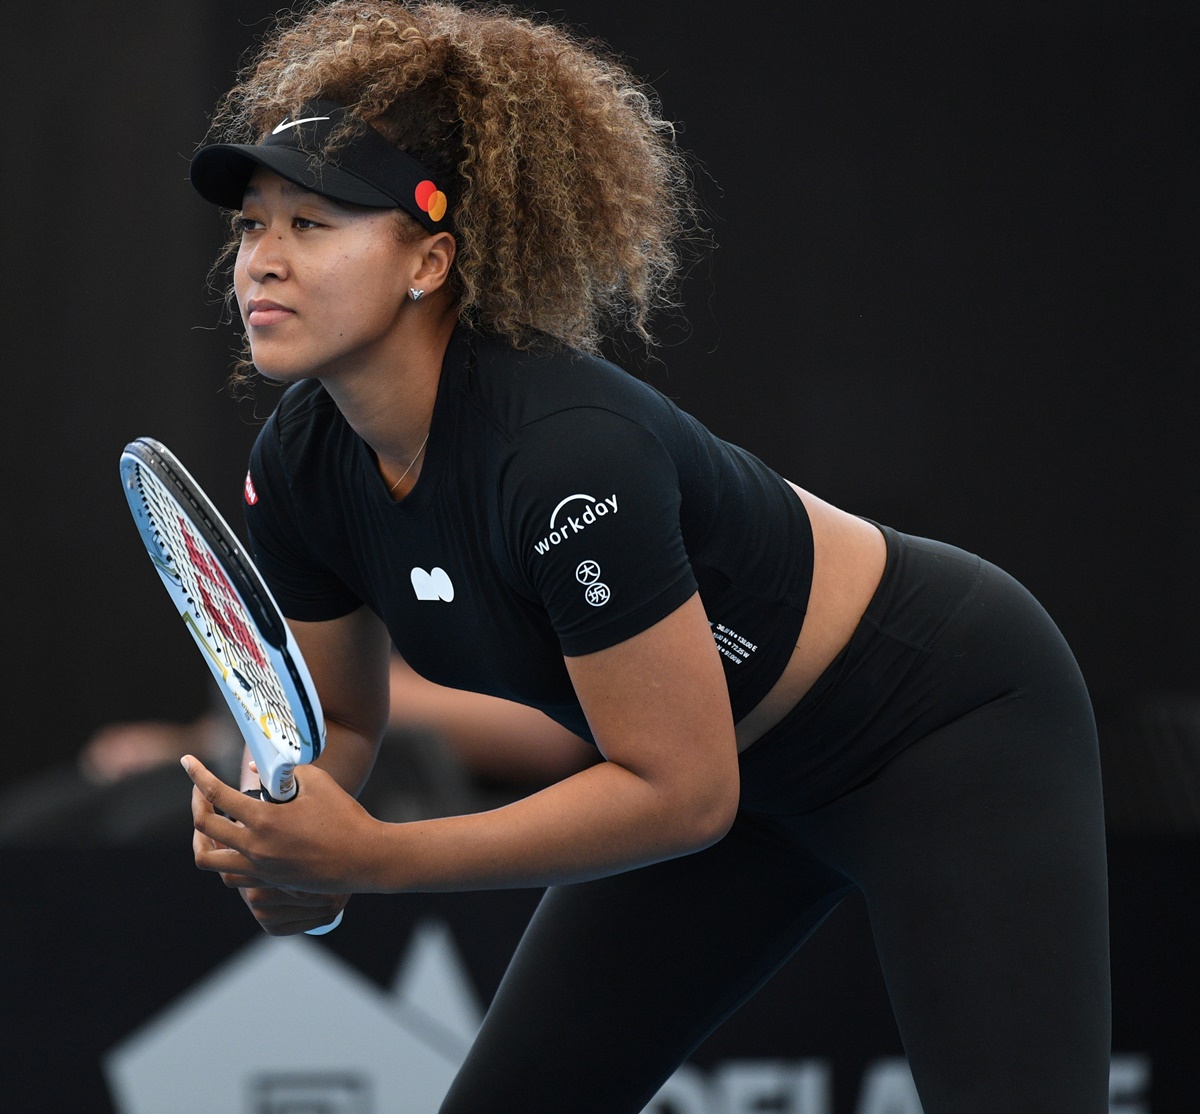 Aus Open loses another star as Osaka withdraws